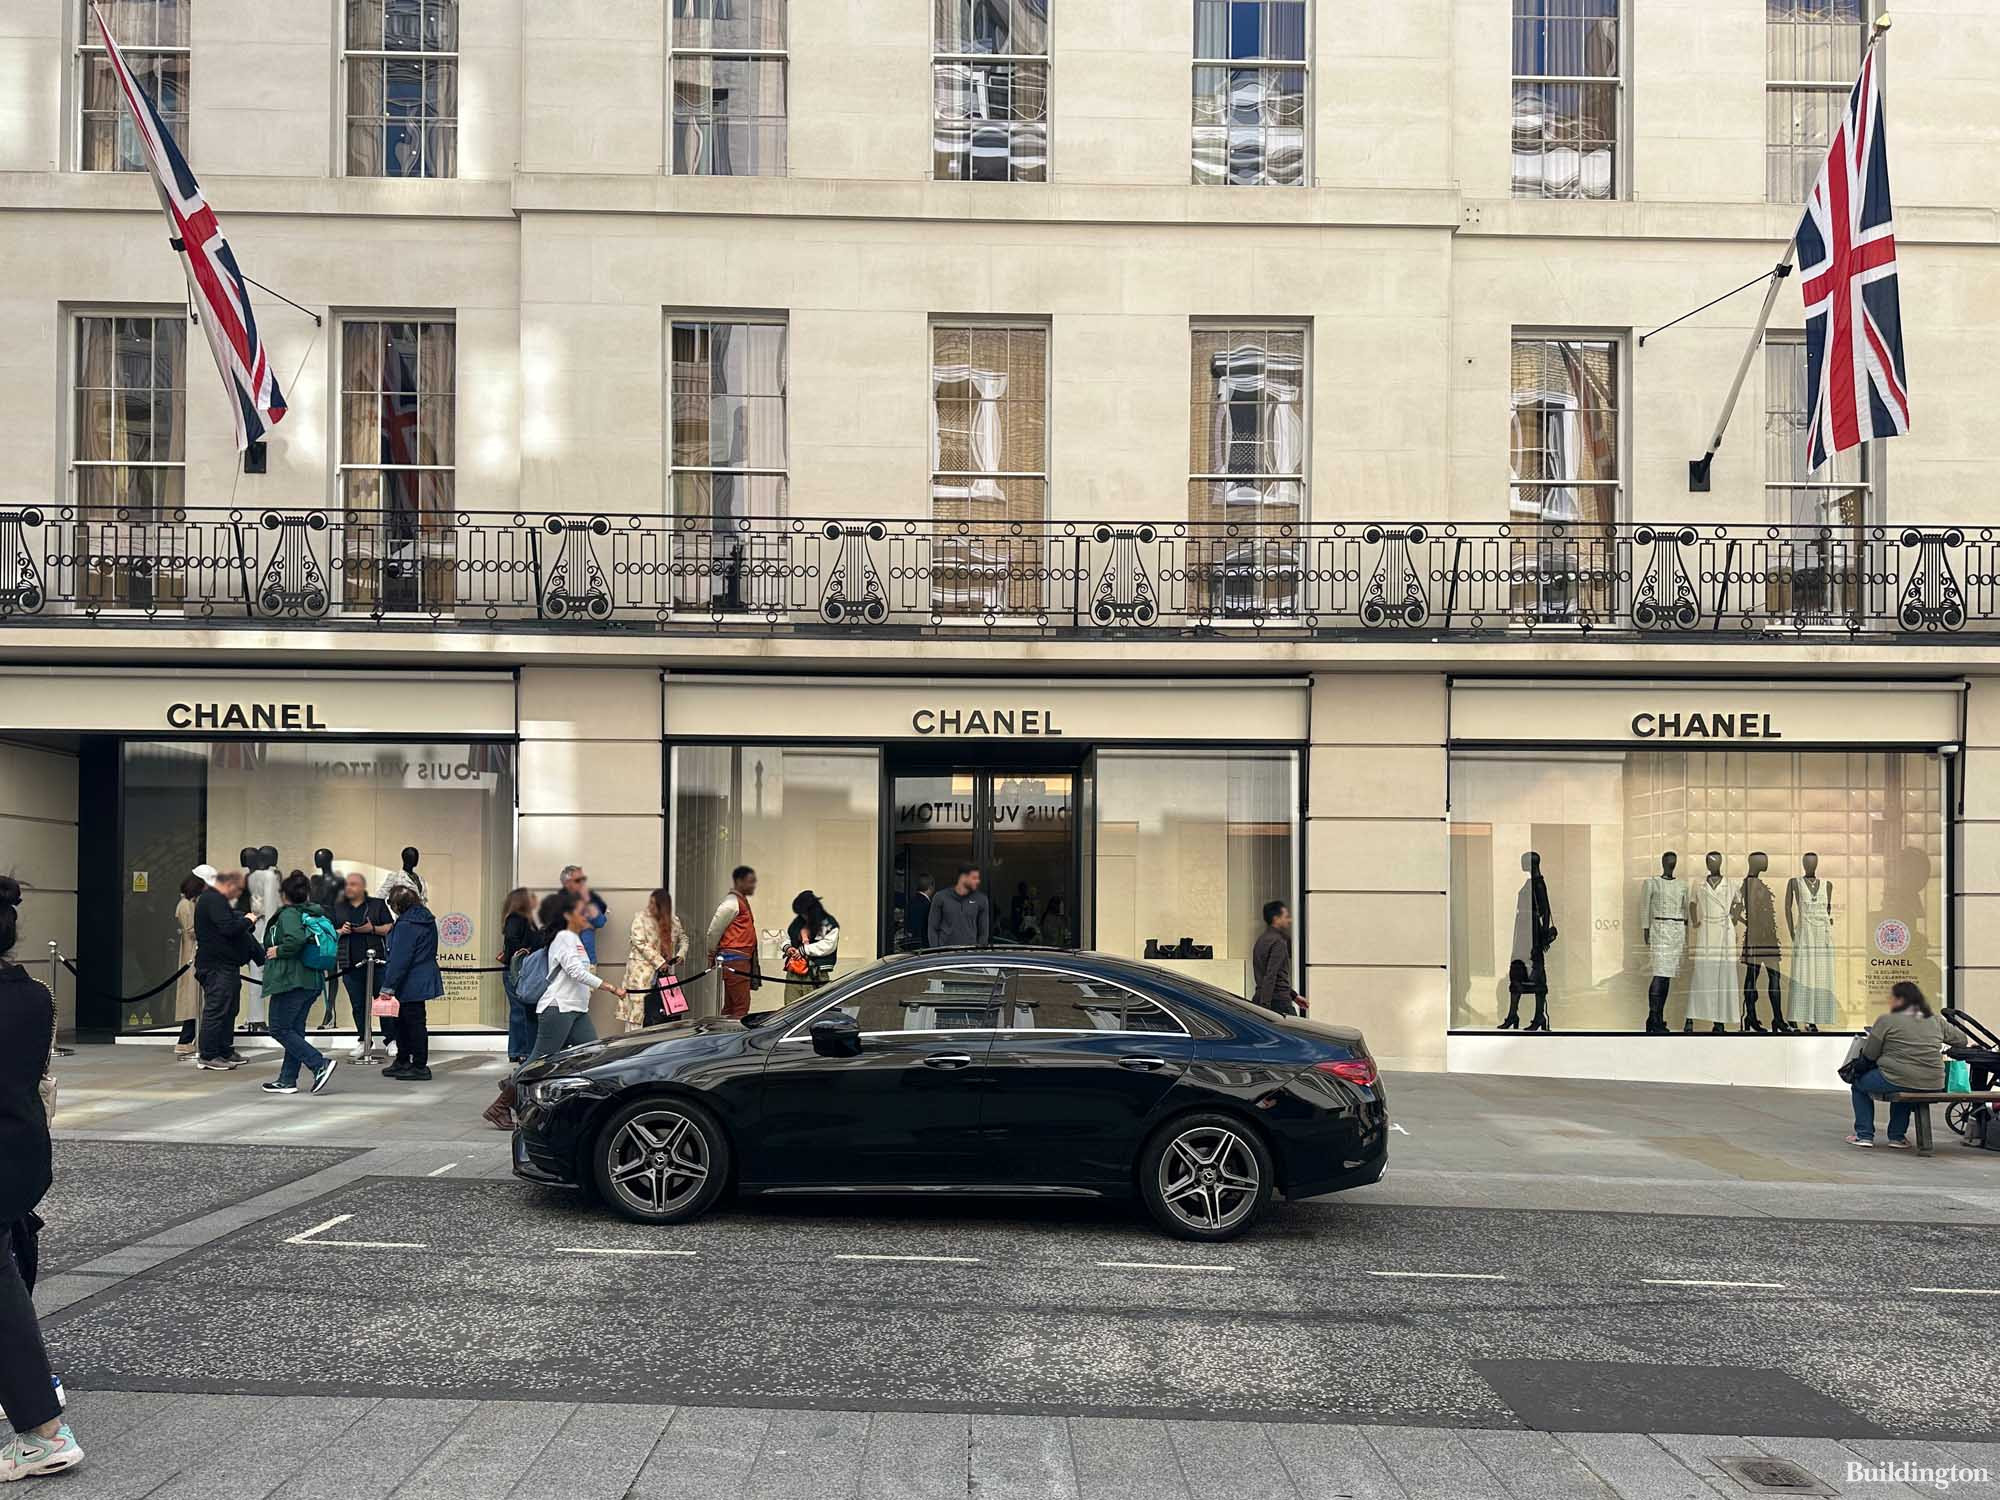 London UK  August 13 2019 Fashion Display In Window Of Chanel Boutique  Shop At Old Bond